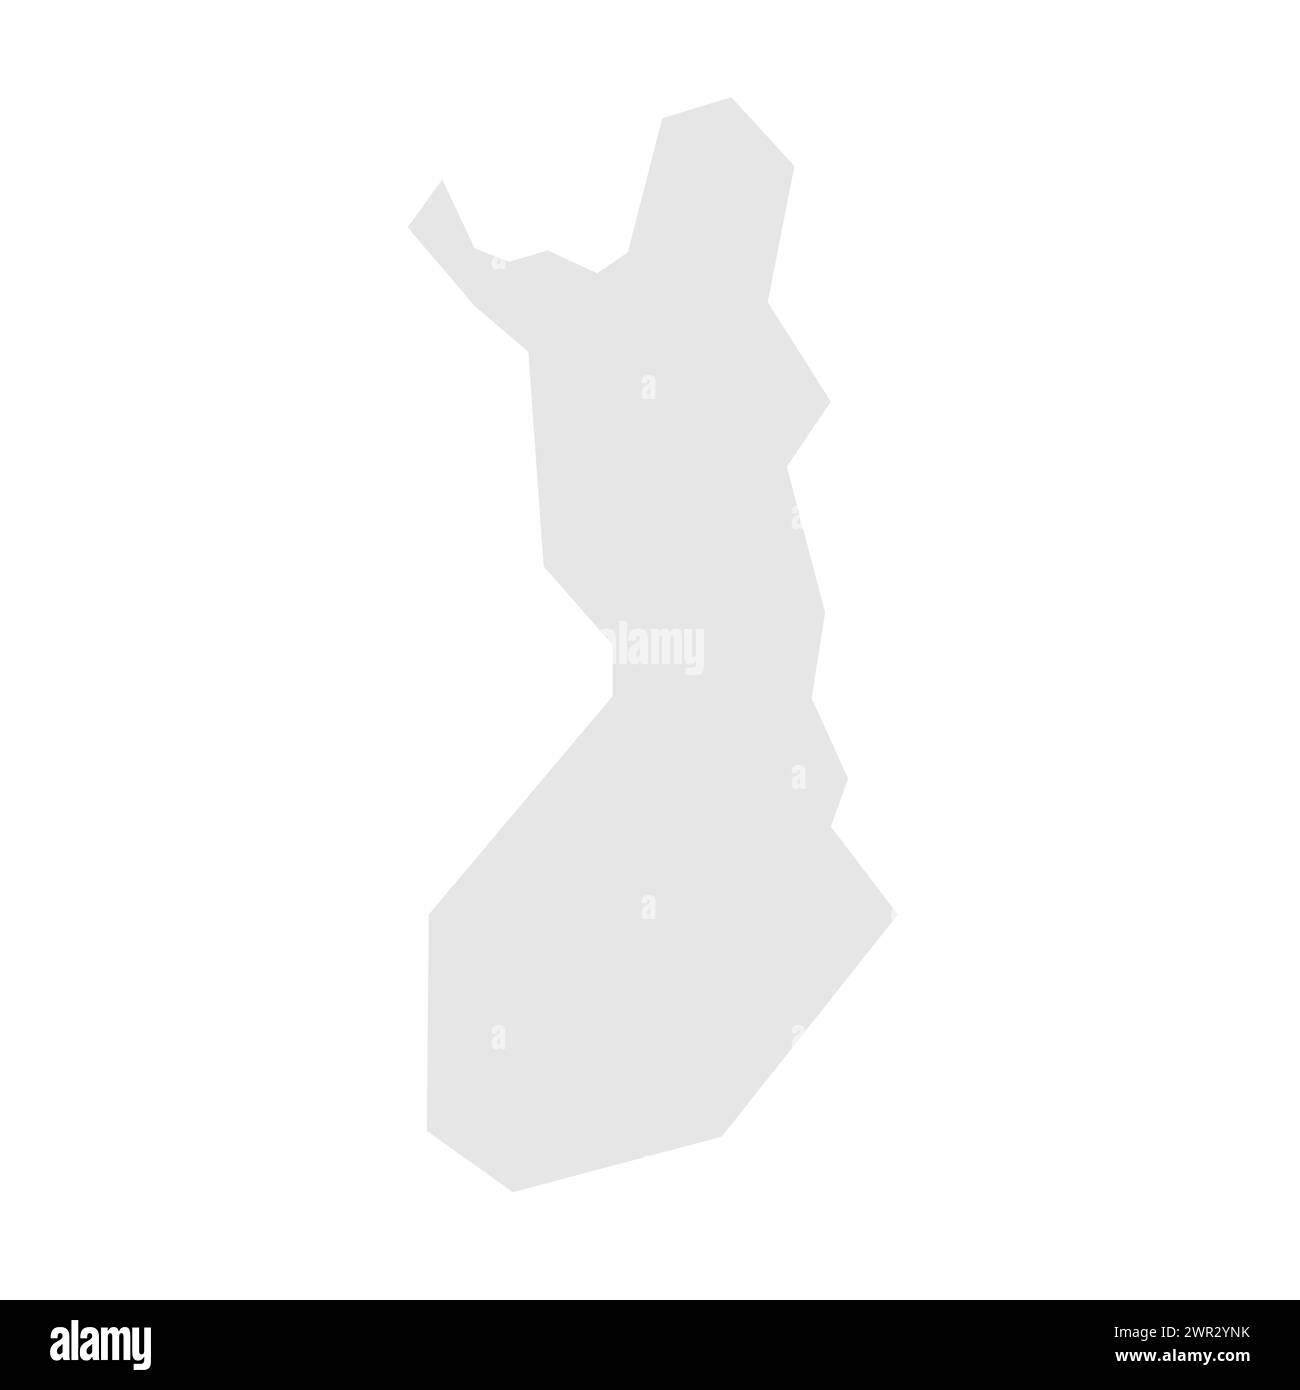 Finland country simplified map. Light grey silhouette with sharp corners isolated on white background. Simple vector icon Stock Vector